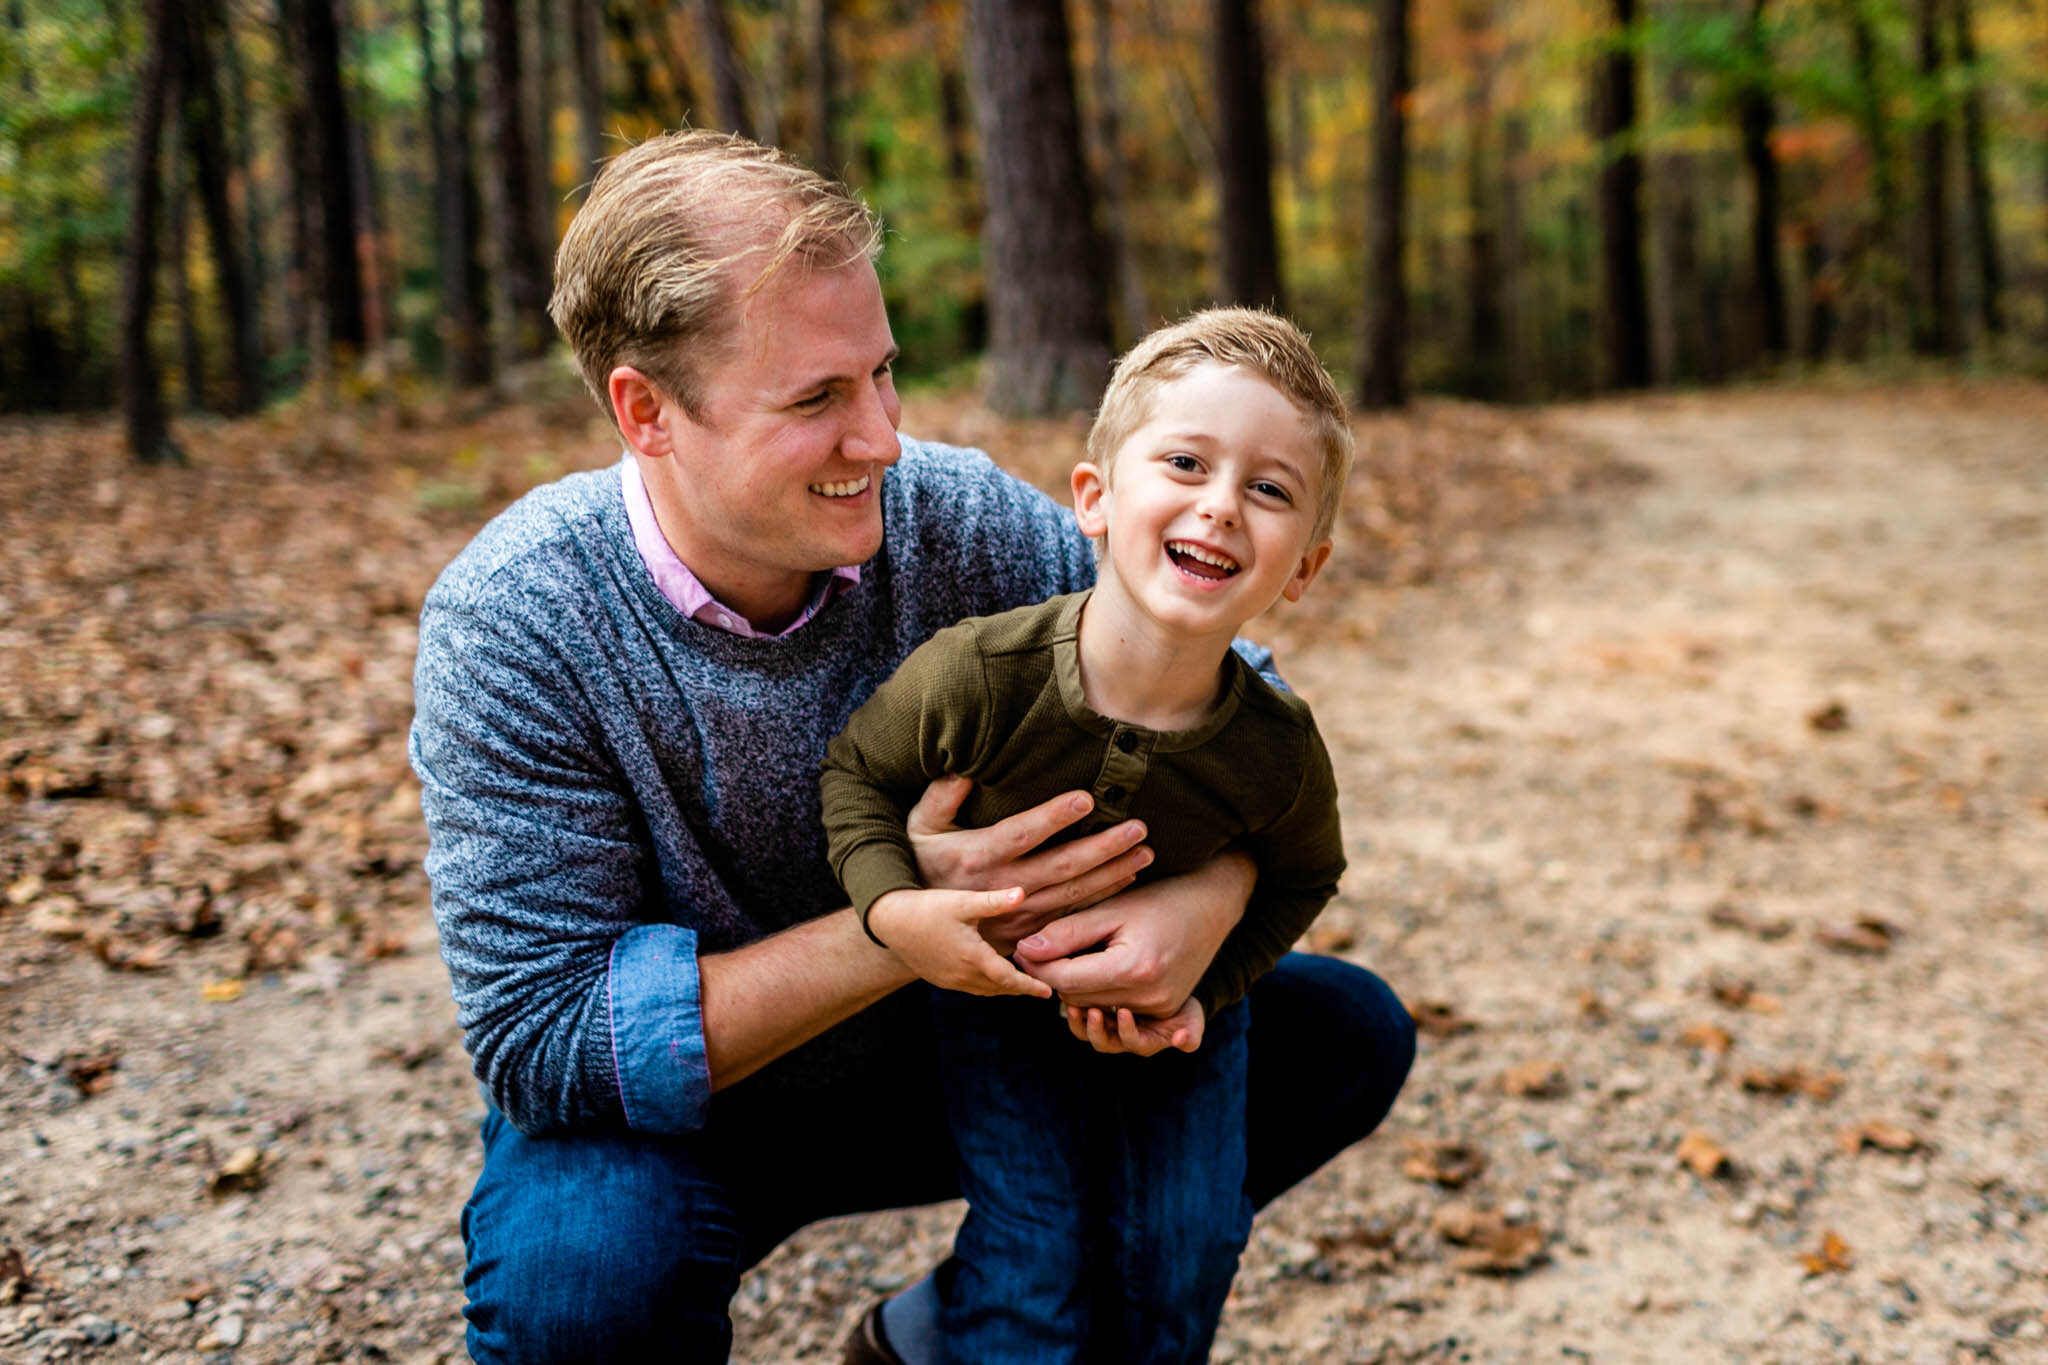 Raleigh Family Photographer at Umstead Park | By G. Lin Photography | Dad tickling and hugging son